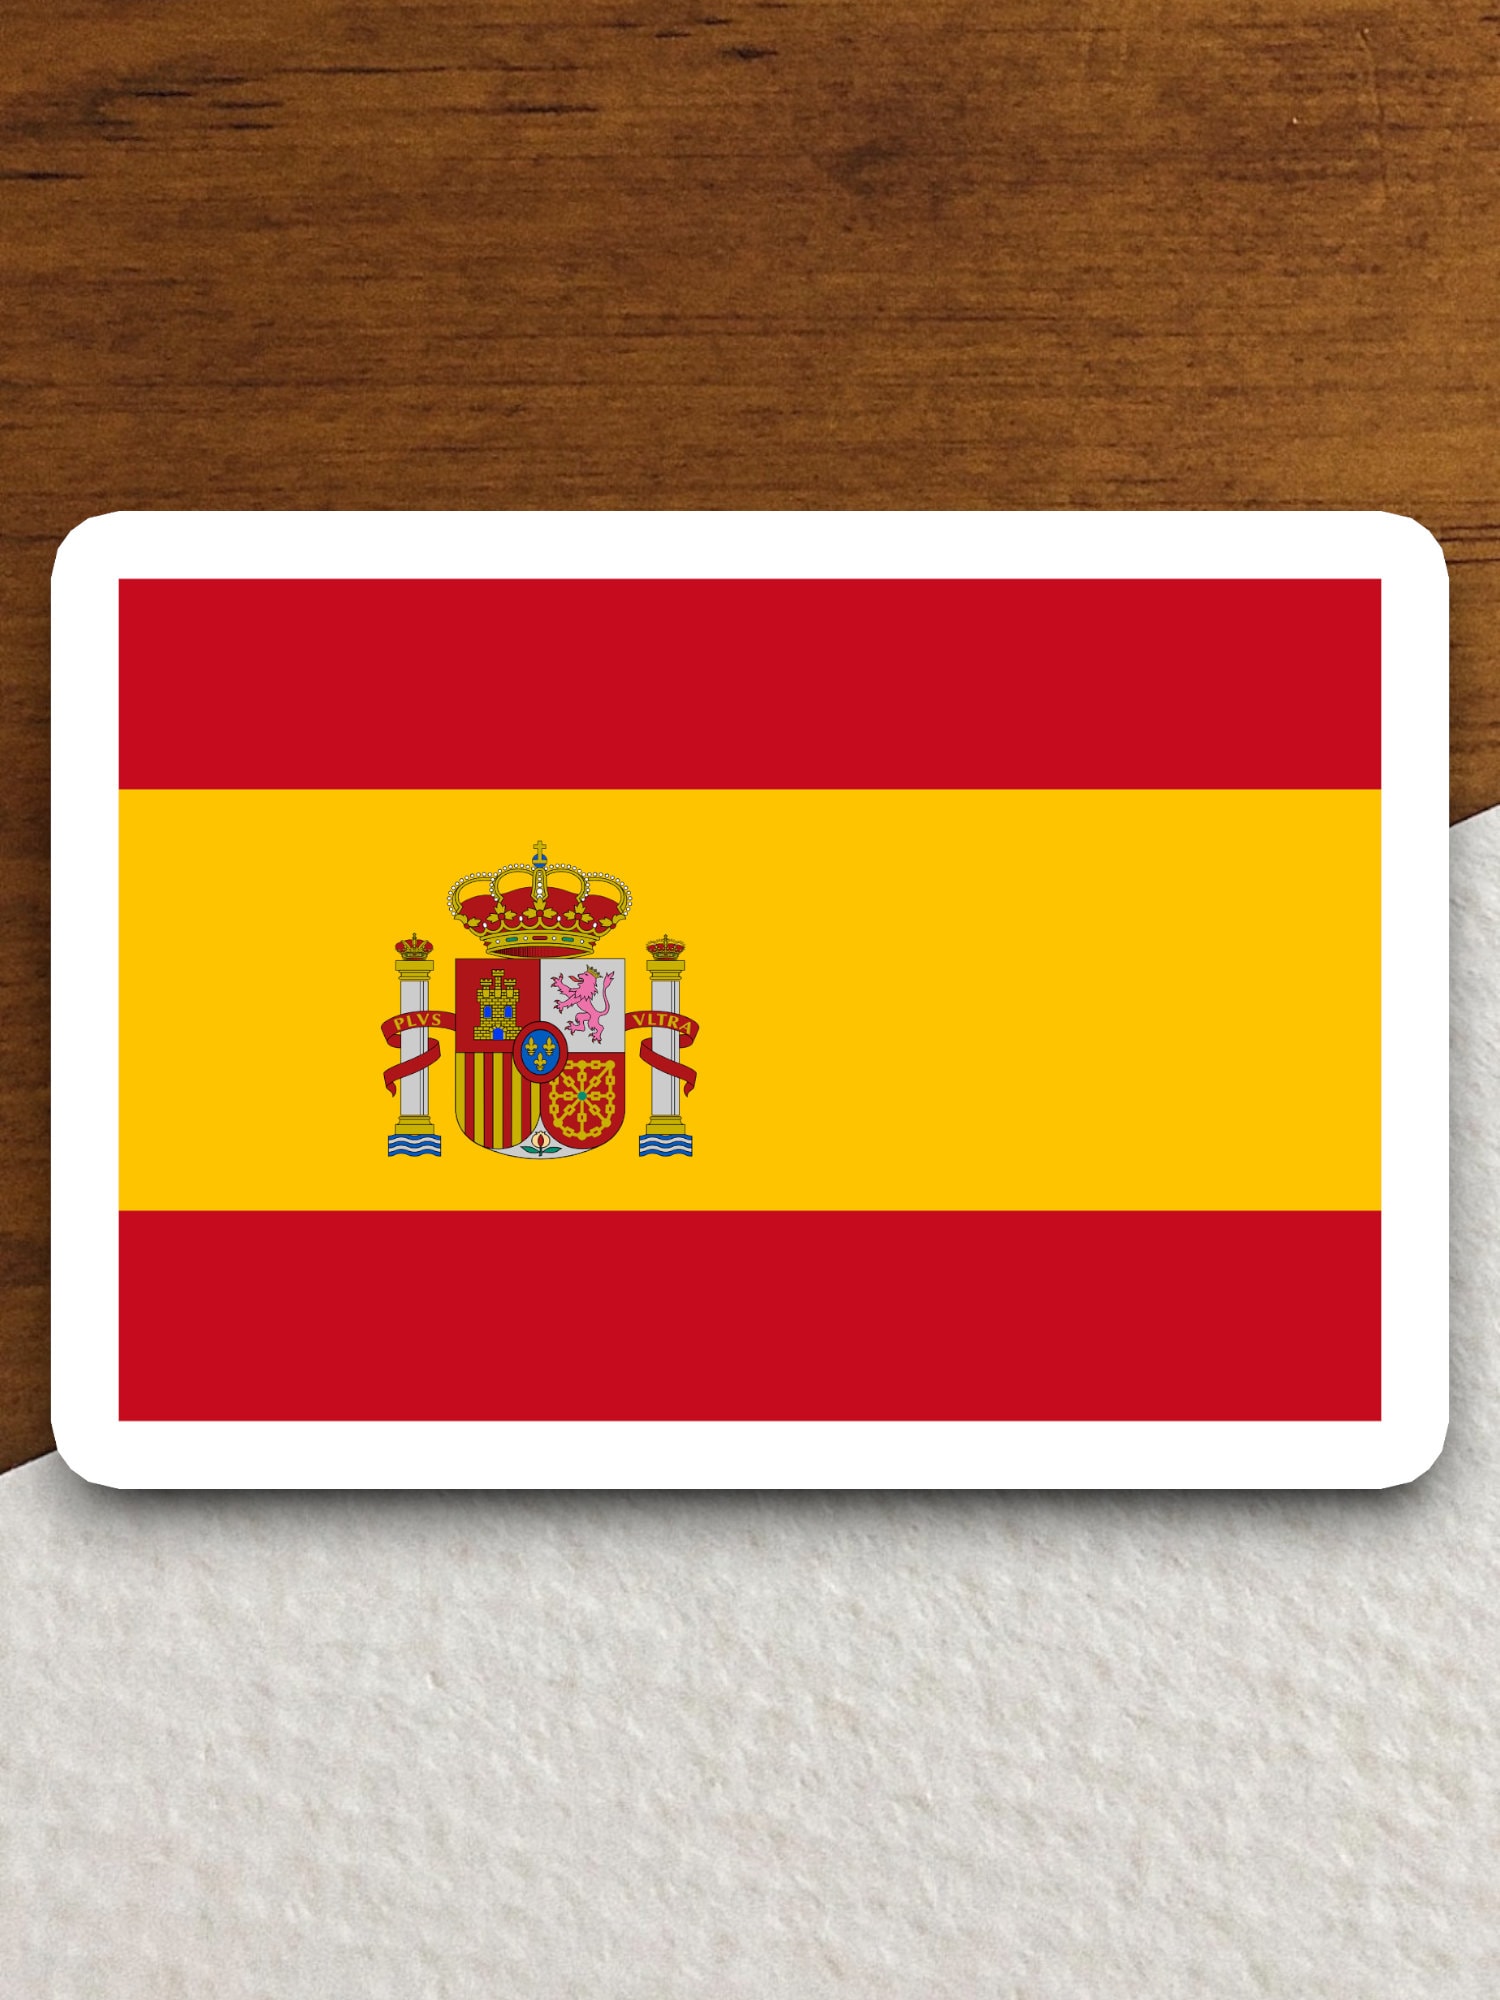 Spain Travel Scrapbook Stickers, Patches, Badges For Prints With Jamon,  Sangria And Spanish Elements. Comic Style Vector Doodle Royalty Free SVG,  Cliparts, Vectors, and Stock Illustration. Image 66573416.